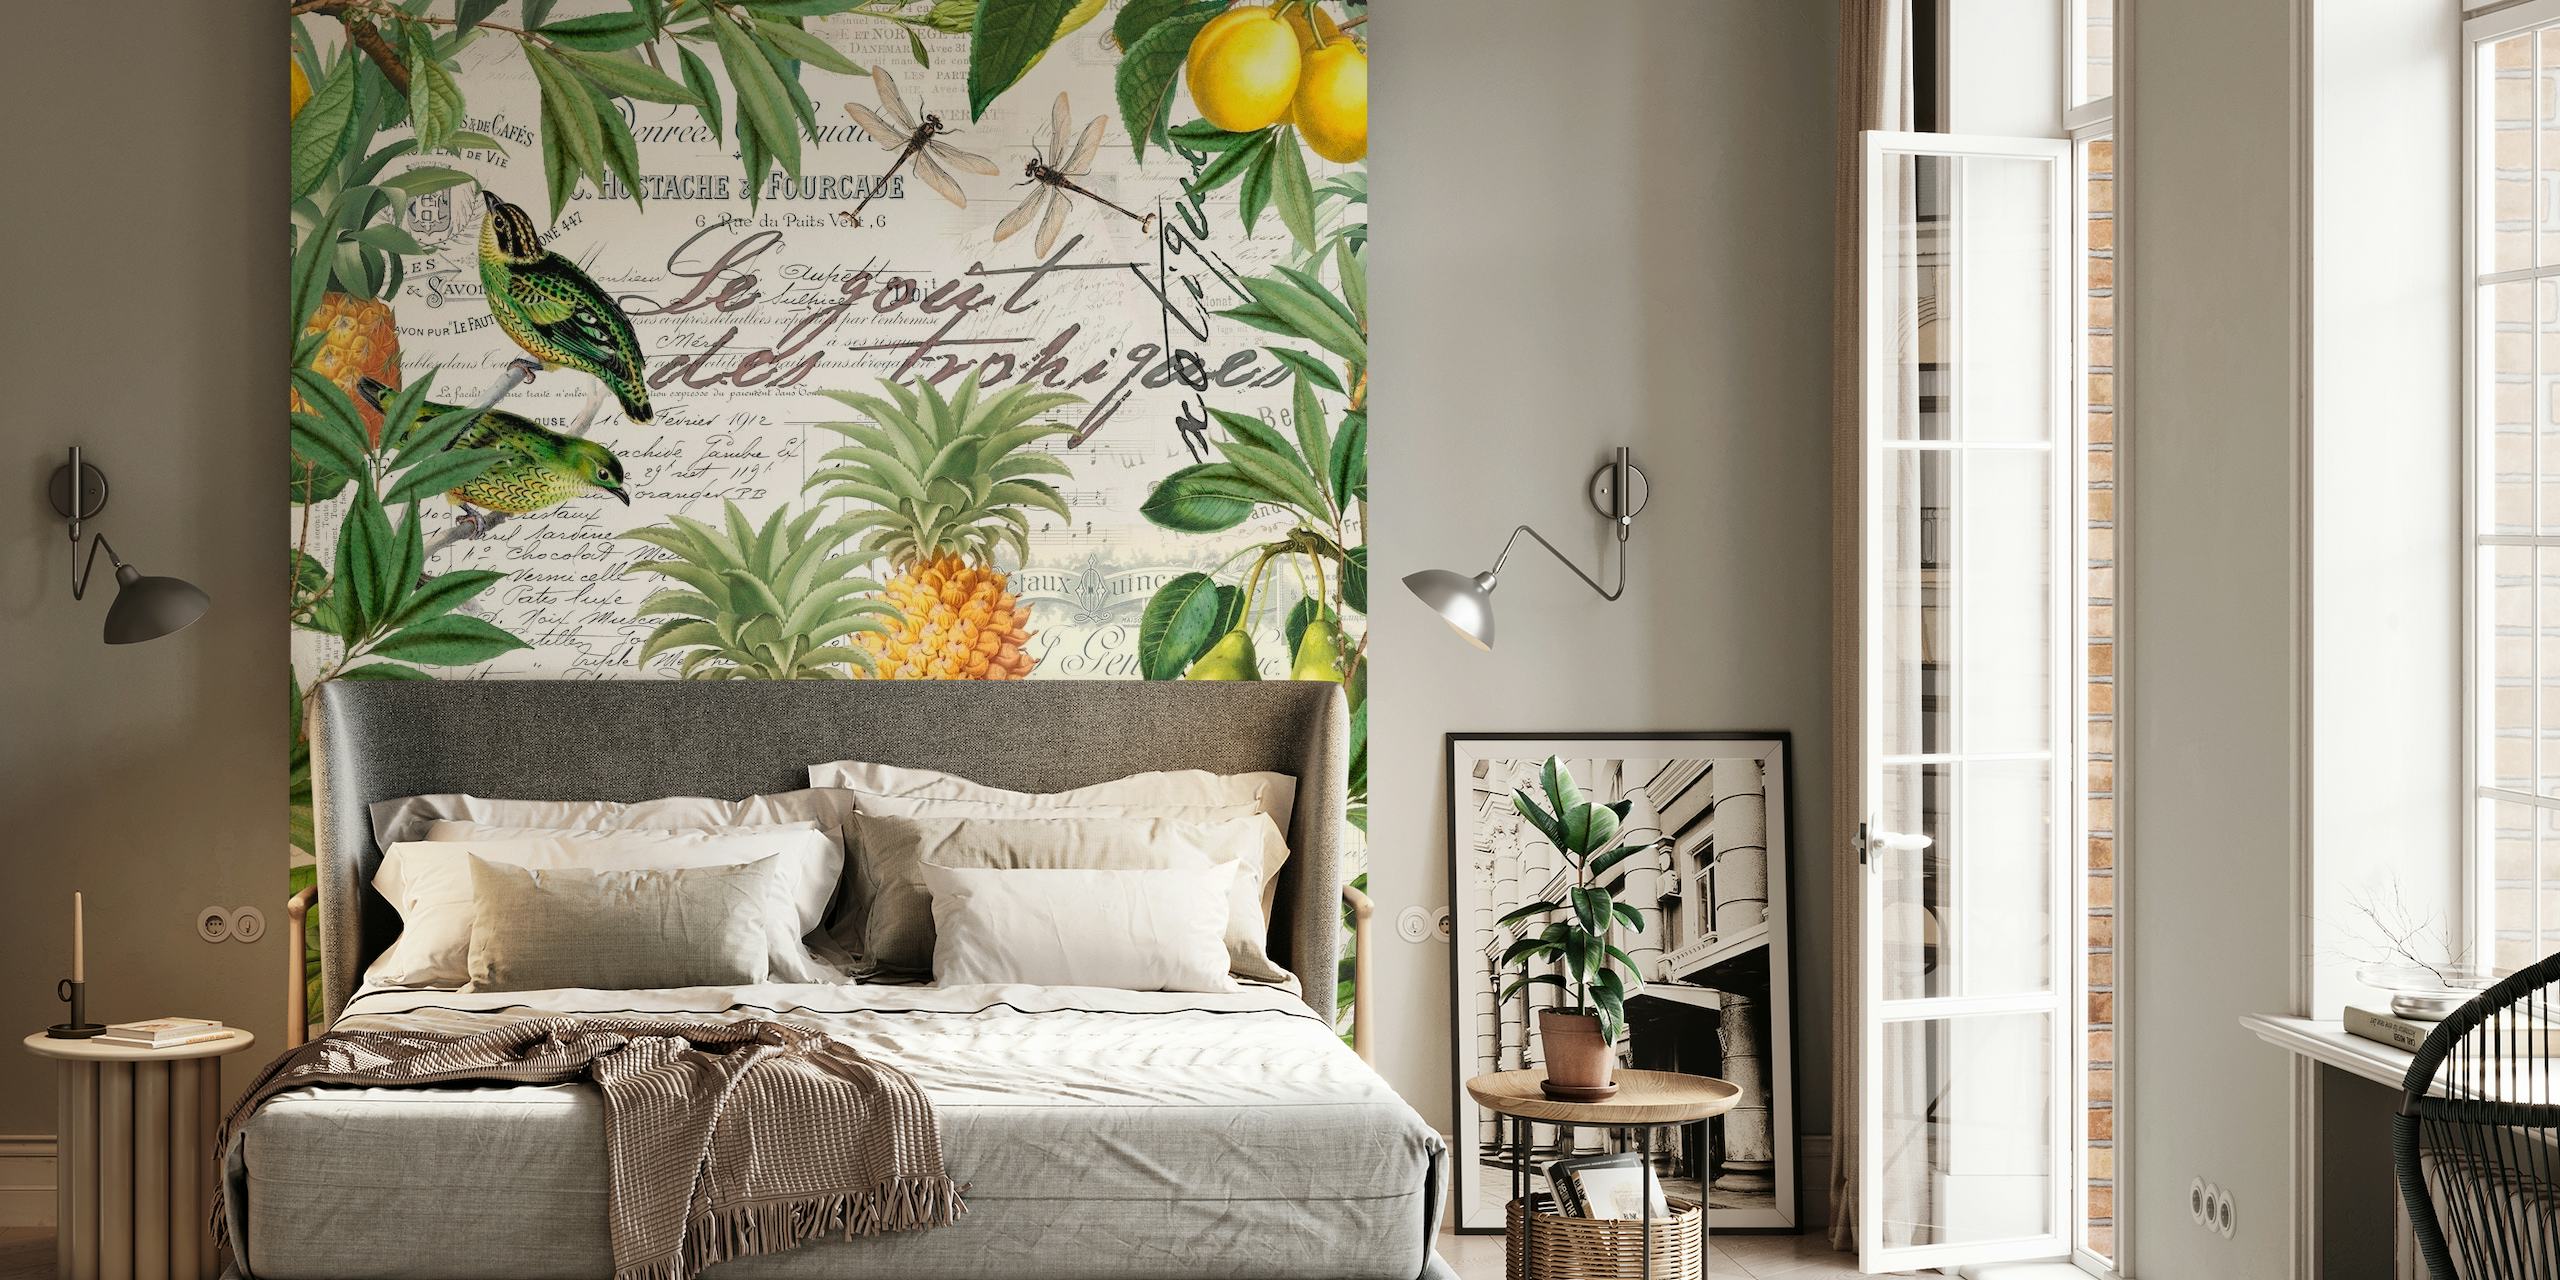 Vintage style wall mural with tropical pineapples and lush greenery on a historical text background